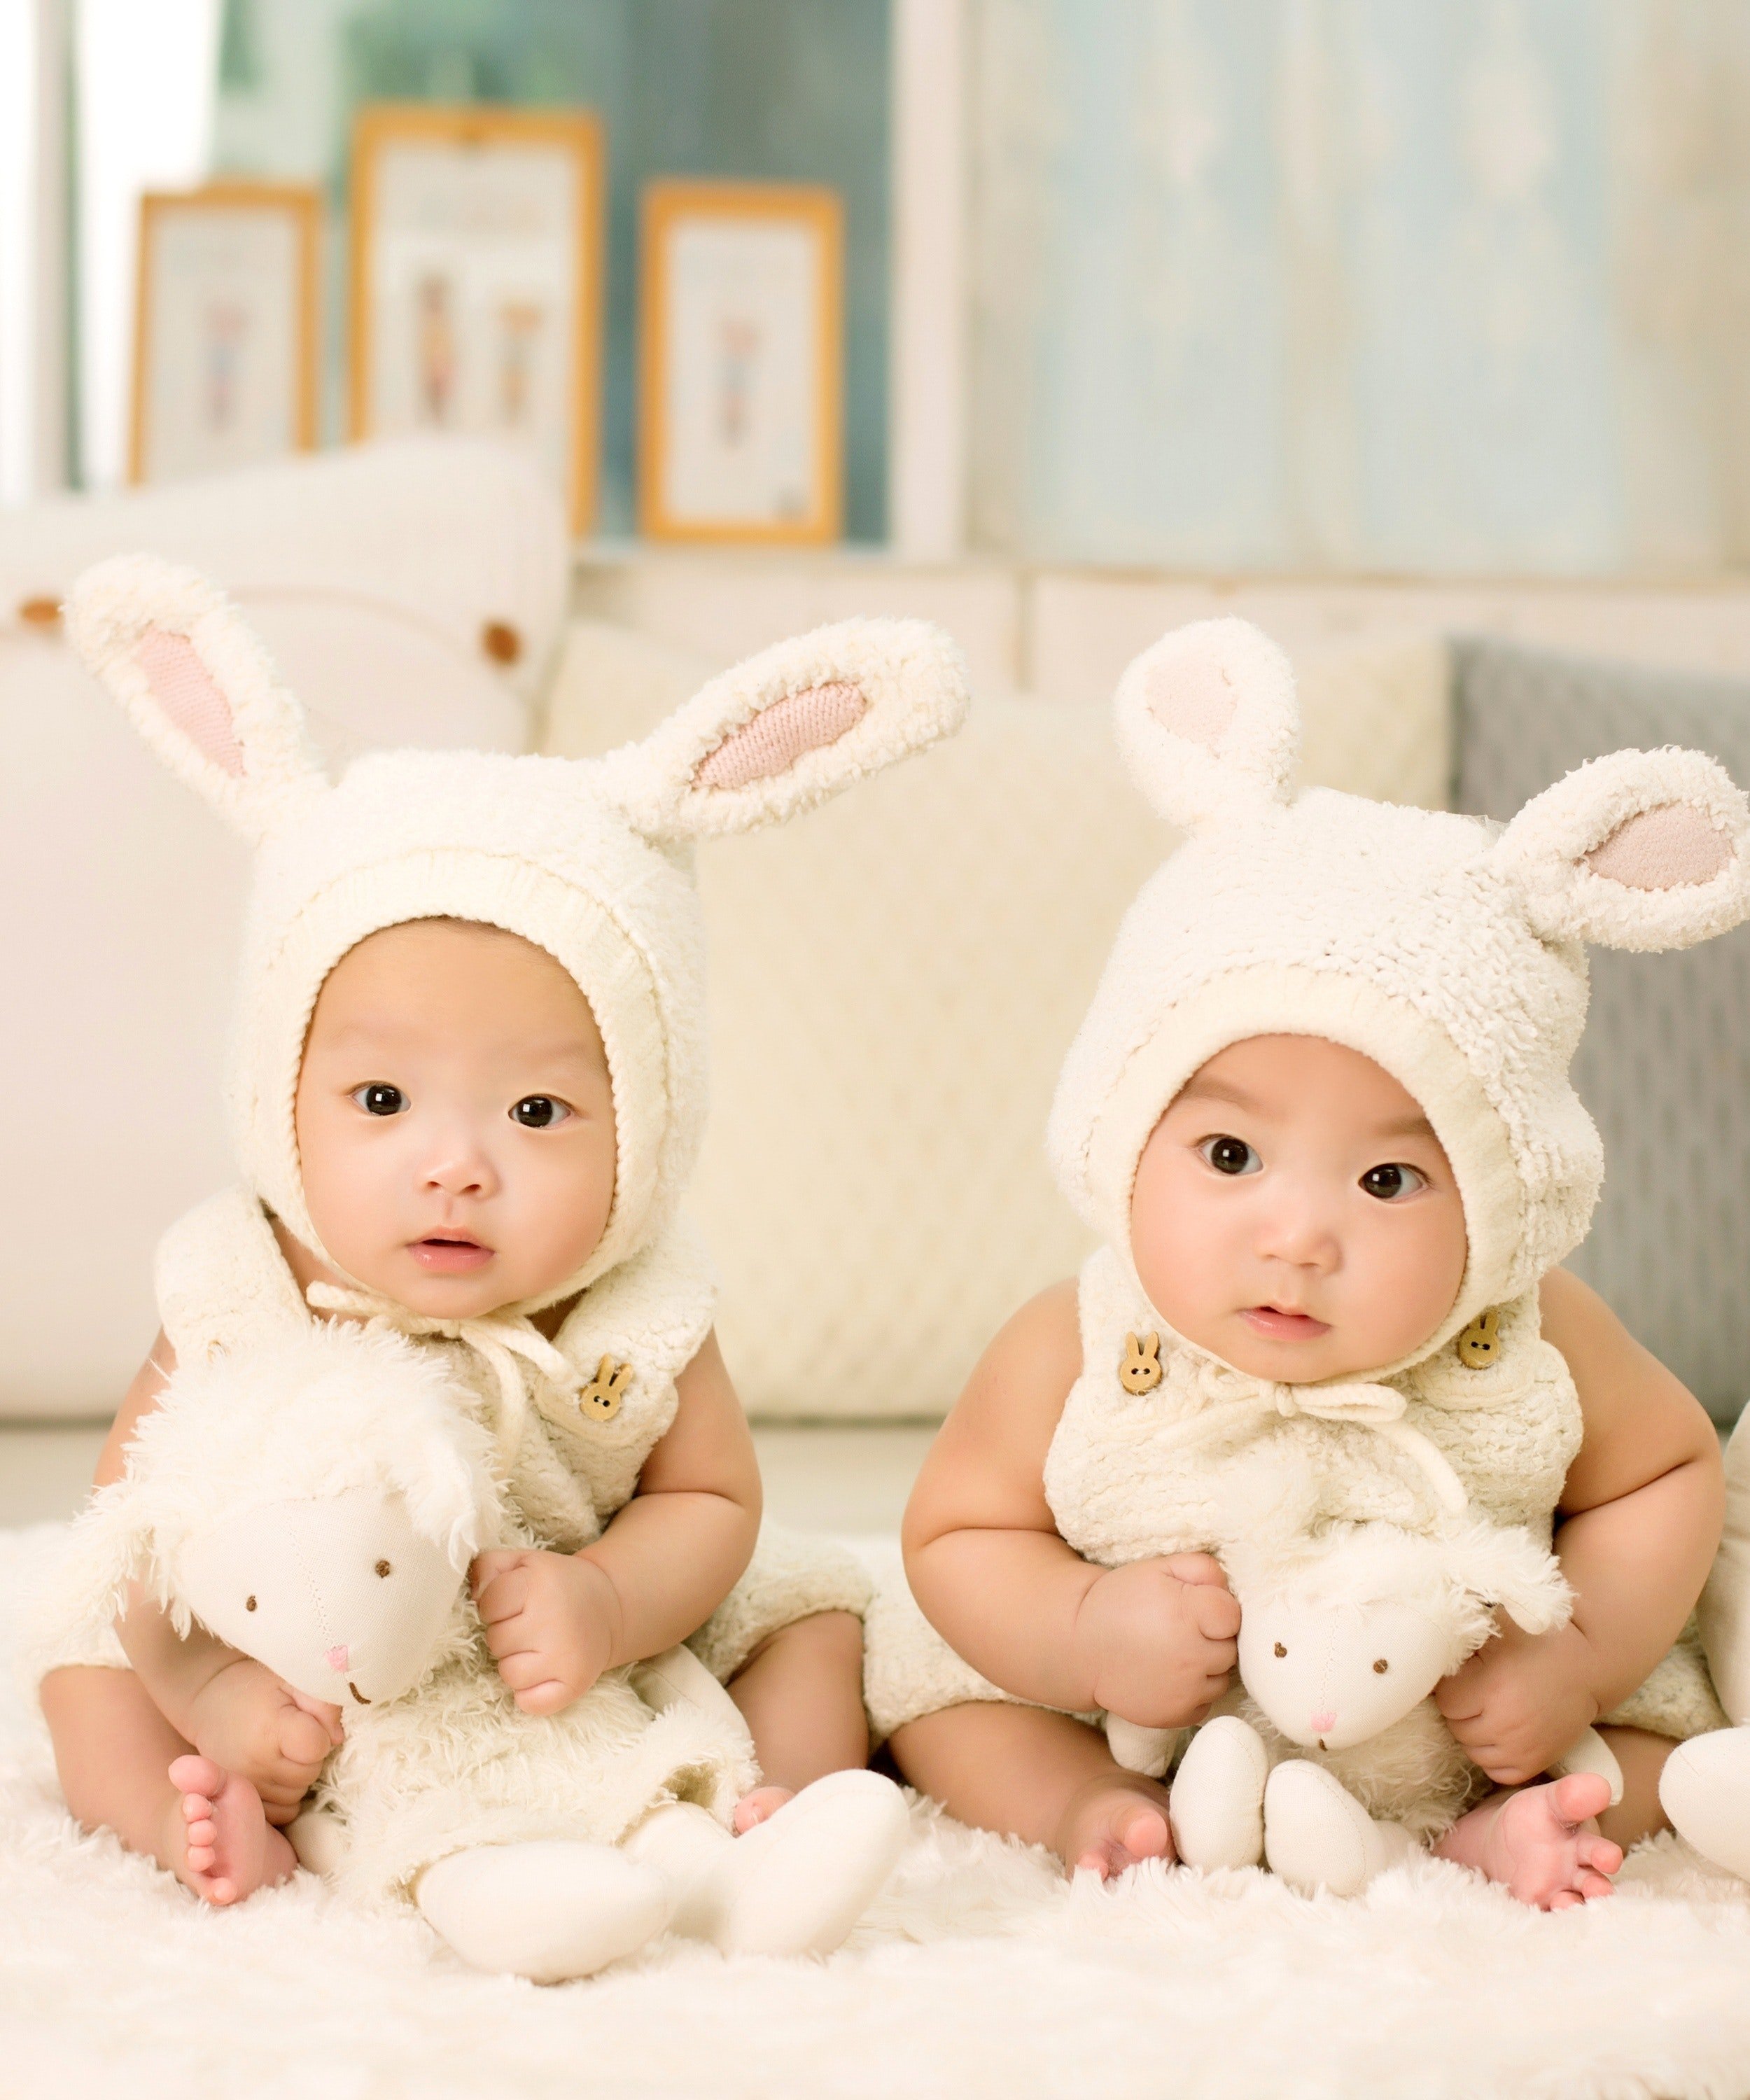 Adorable image of babies in cute bunny outfits | Photo: Pexels